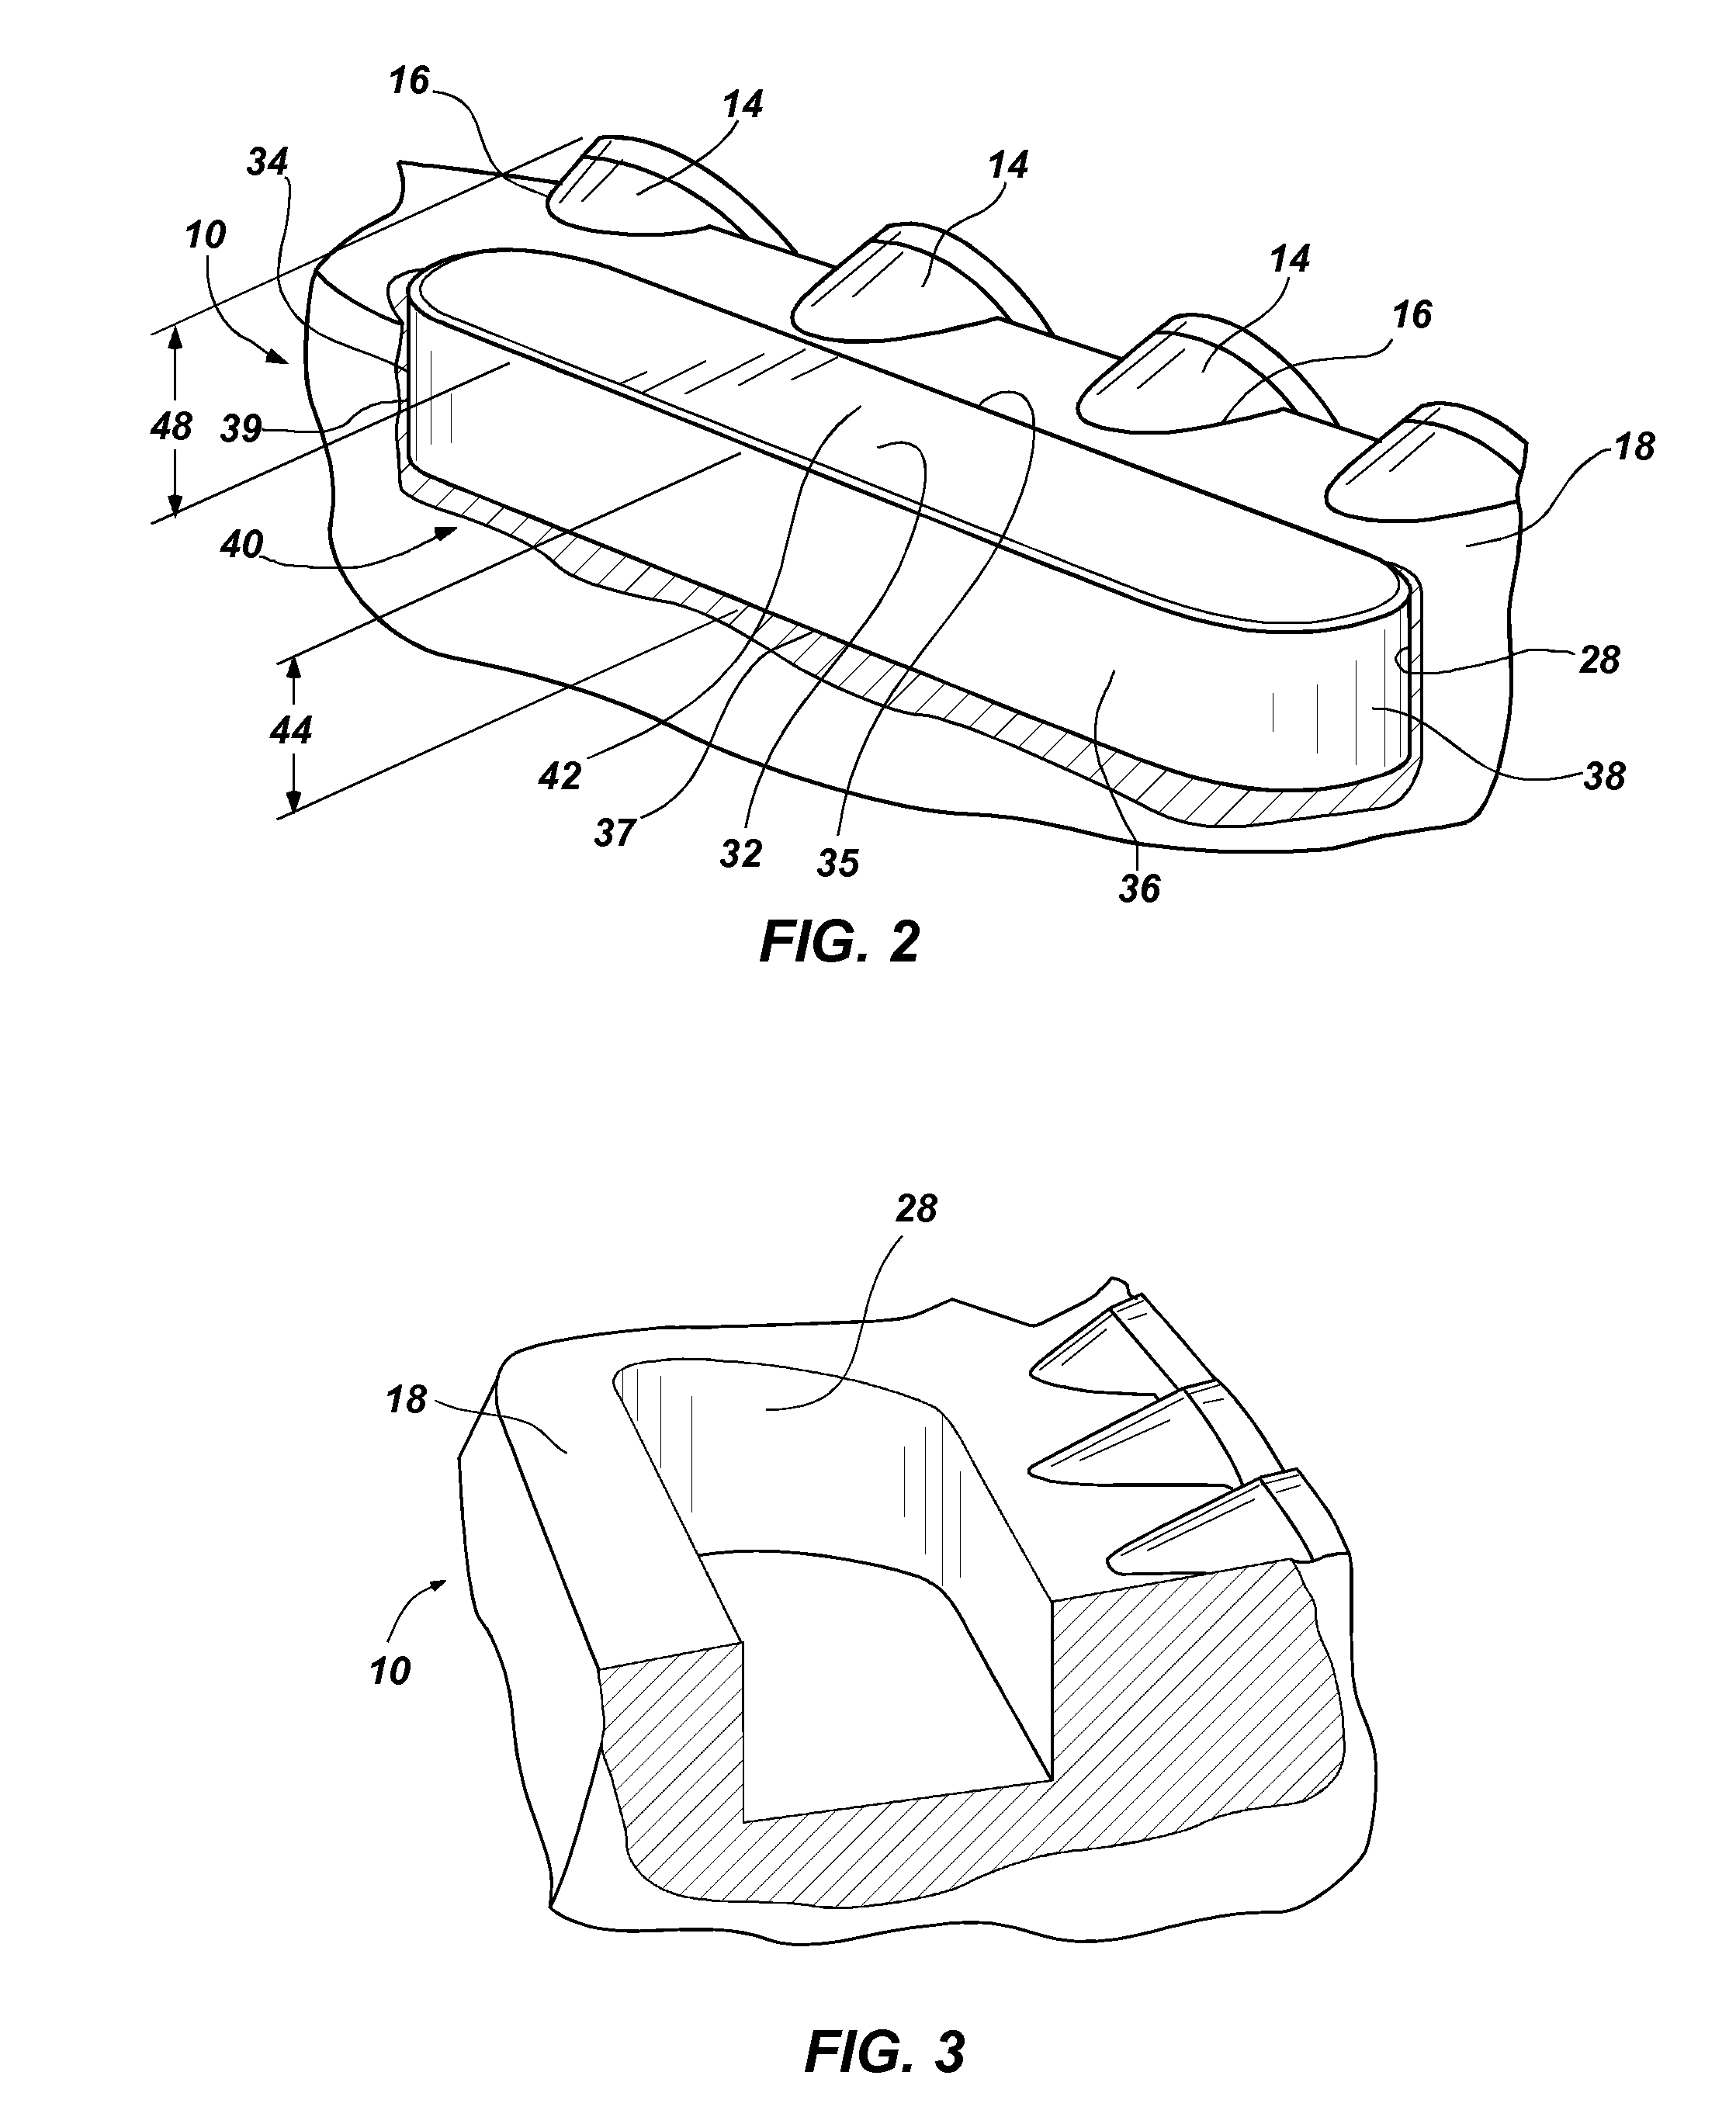 Bearing blocks for drill bits, drill bit assemblies including bearing blocks and related methods